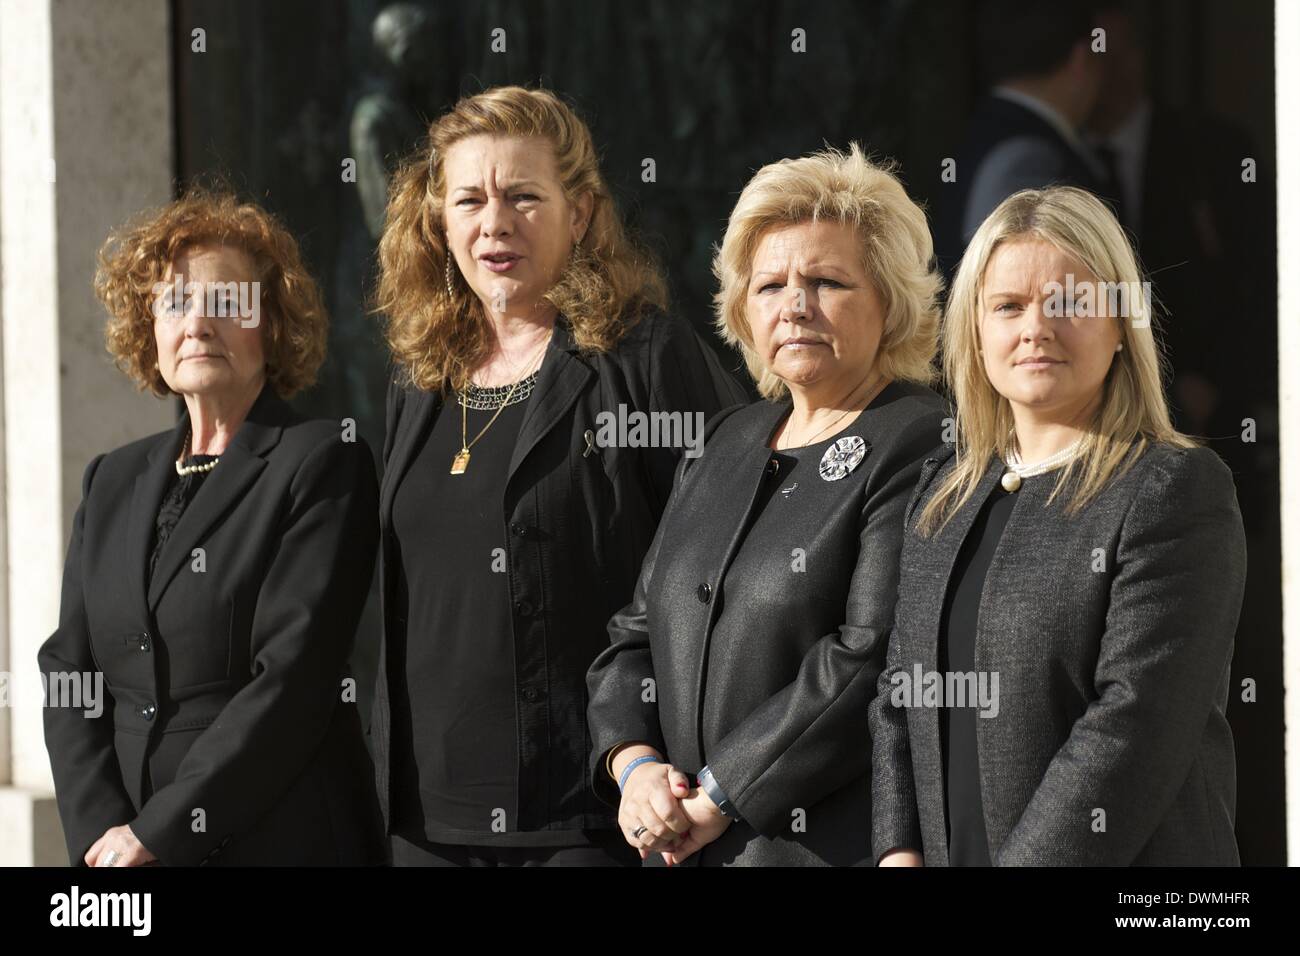 Madrid, Spain. 11th Mar, 2014. Heads of victims' associations ANGELES DOMINGUEZ, PILAR MANJON ANGELES PEDRAZA and MARIA DEL MAR BLANCO attend Solemn Mass honoring and remembering the victims on the 10th anniversary of the terrorist attacks of March 11, 2004 at Almudena Cathedral in Madrid Credit:  Jack Abuin/ZUMAPRESS.com/Alamy Live News Stock Photo